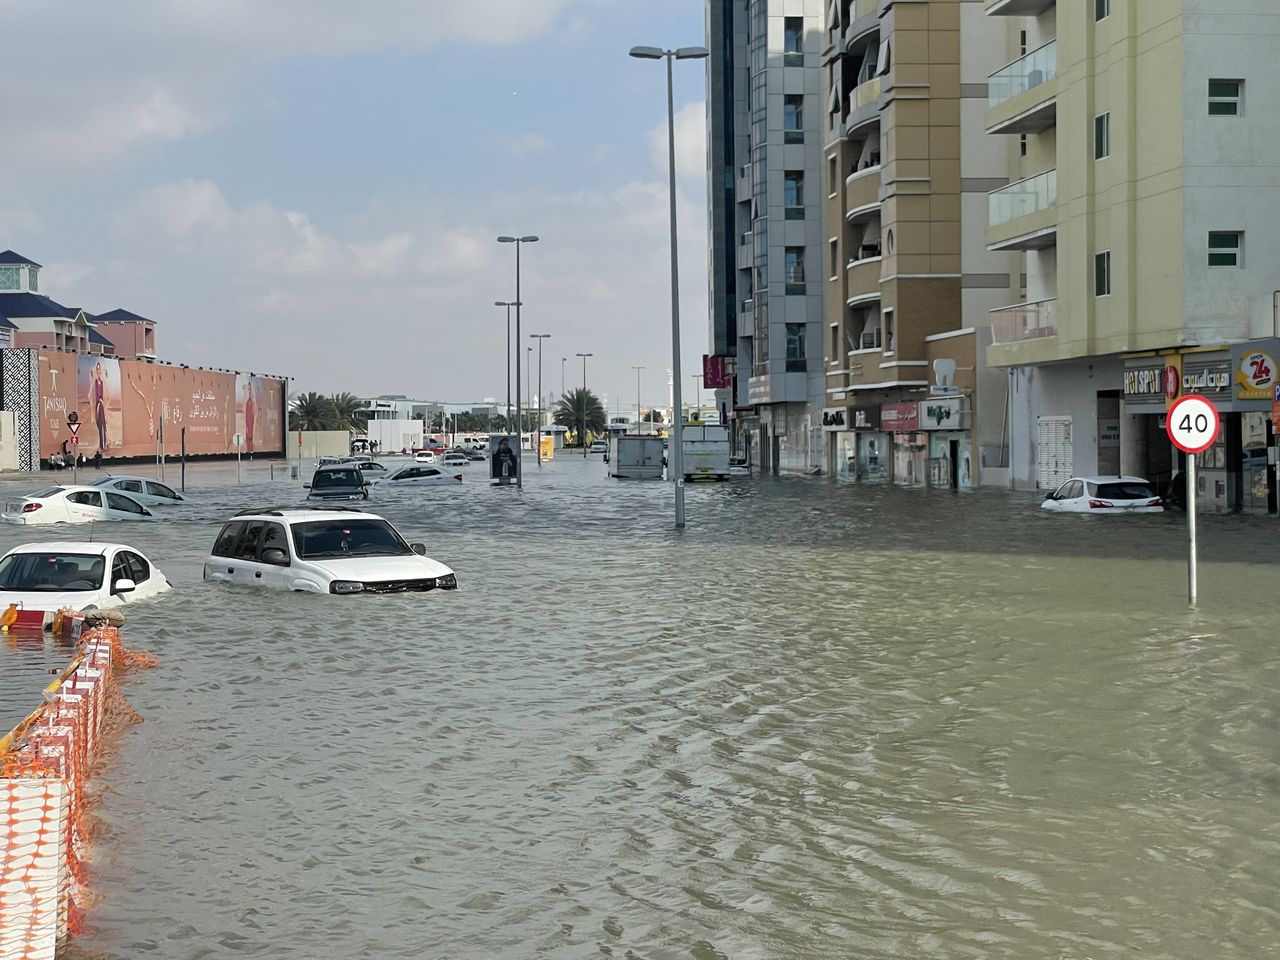 Flooded streets in Dubai. As a result of the flood, one person died.